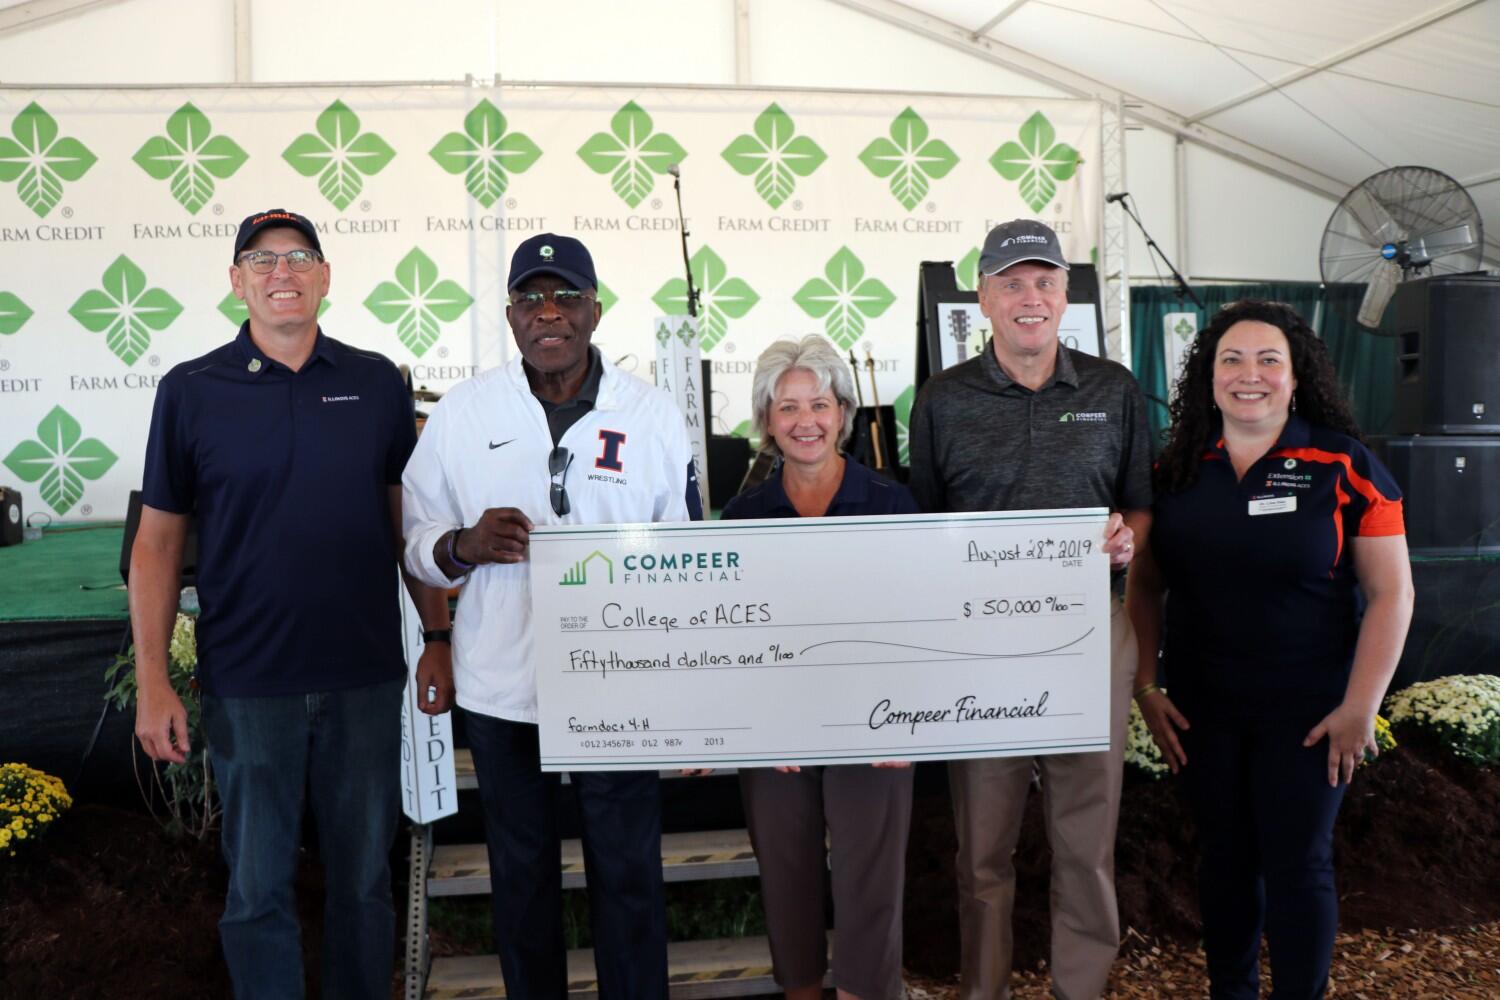 Compeer Financial investment in College of ACES supports farmdoc, 4-H